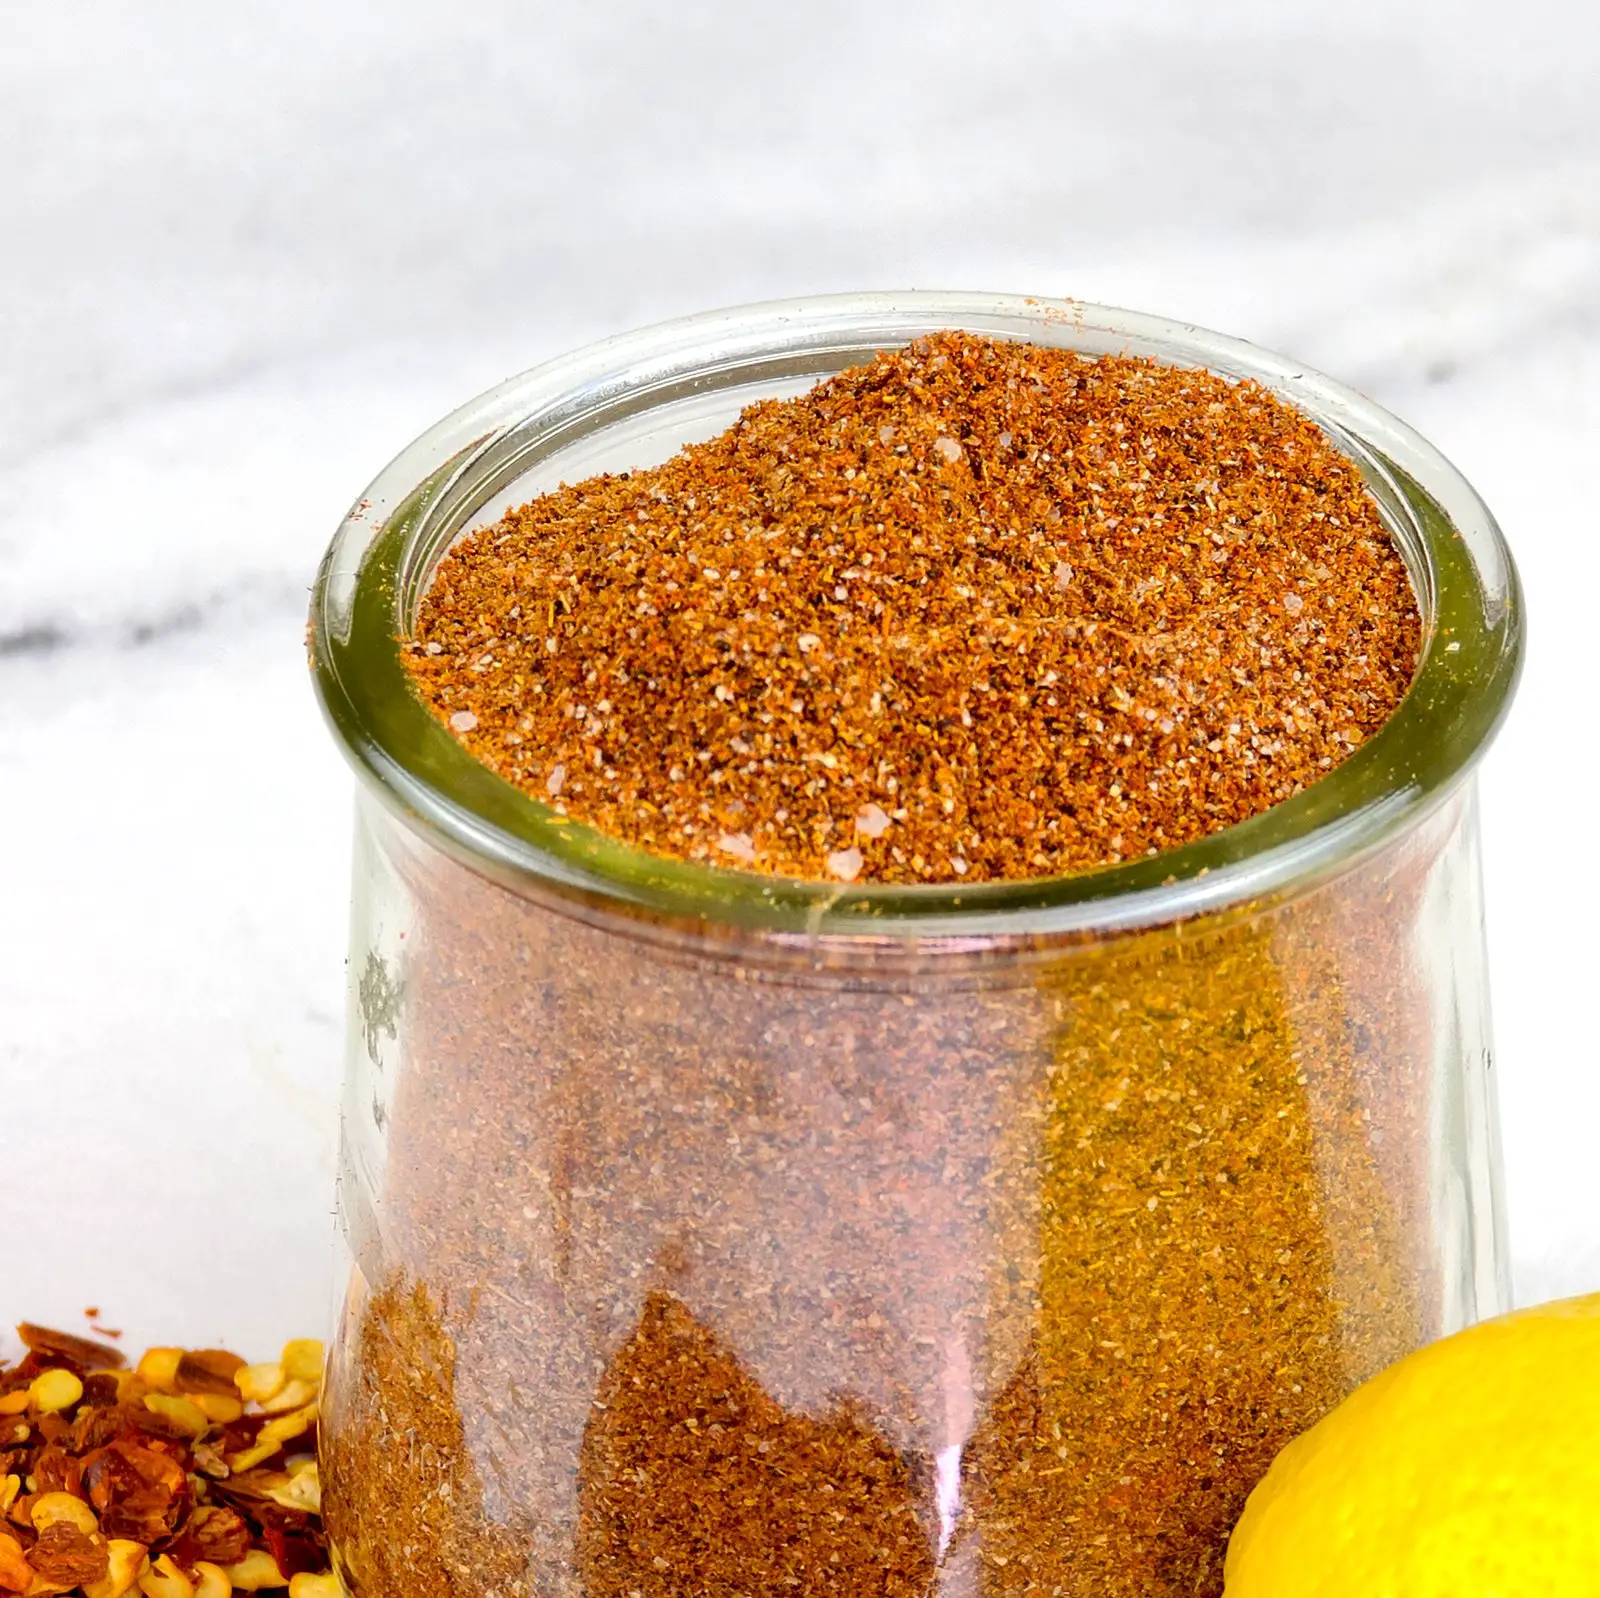 Homemade taco seasoning mix recipe in a glass jar. In the background are red pepper flakes and a lemon on a white marble background